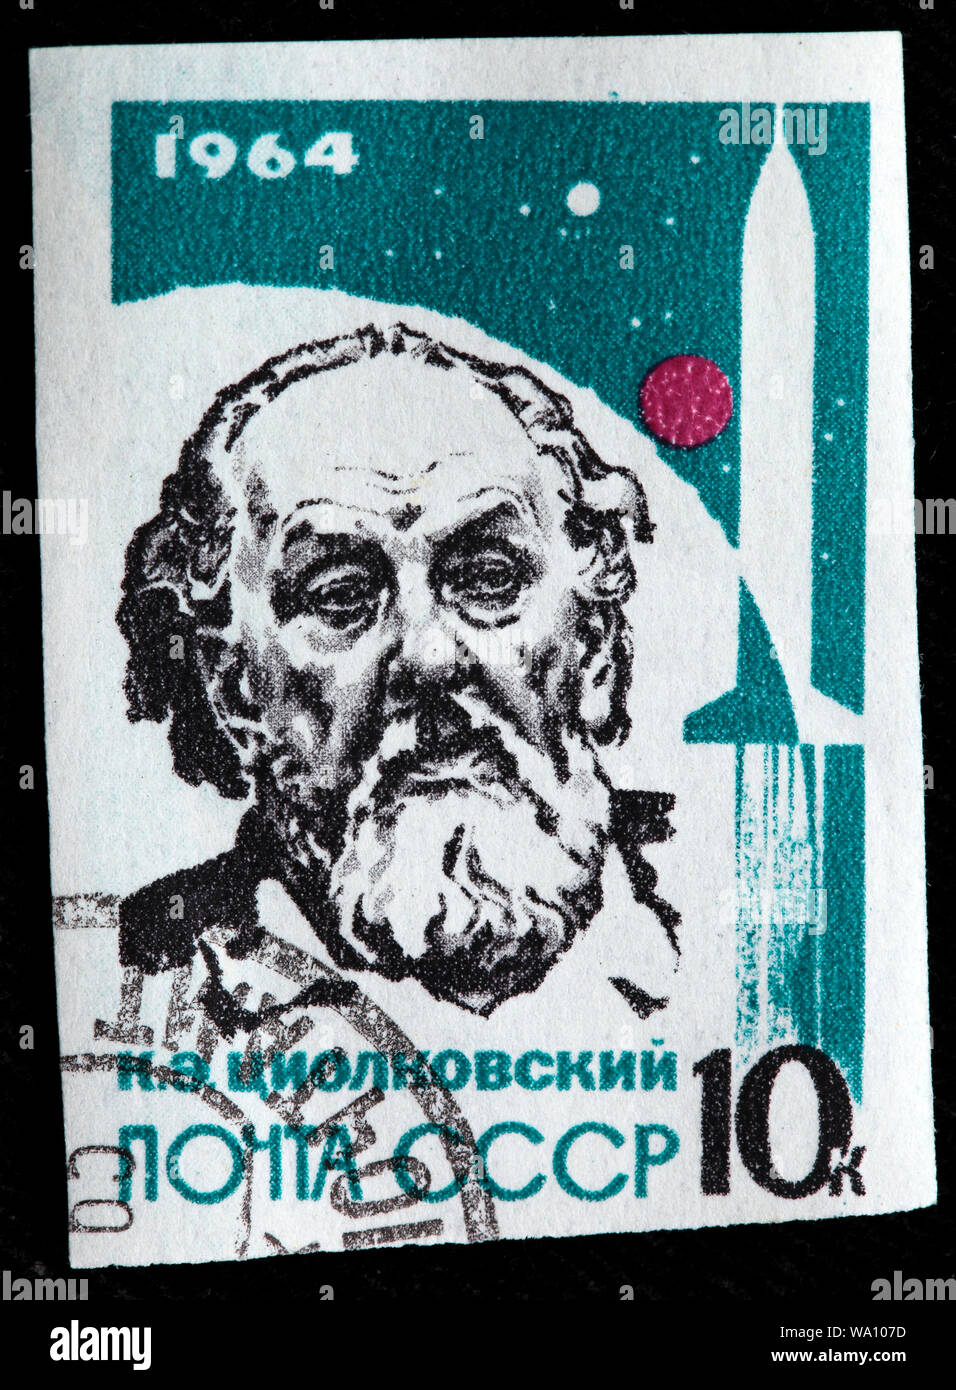 Konstantin Tsiolkovsky (1857-1935), Russian rocket scientist, pioneer of the astronautic theory, postage stamp, Russia, USSR, 1964 Stock Photo